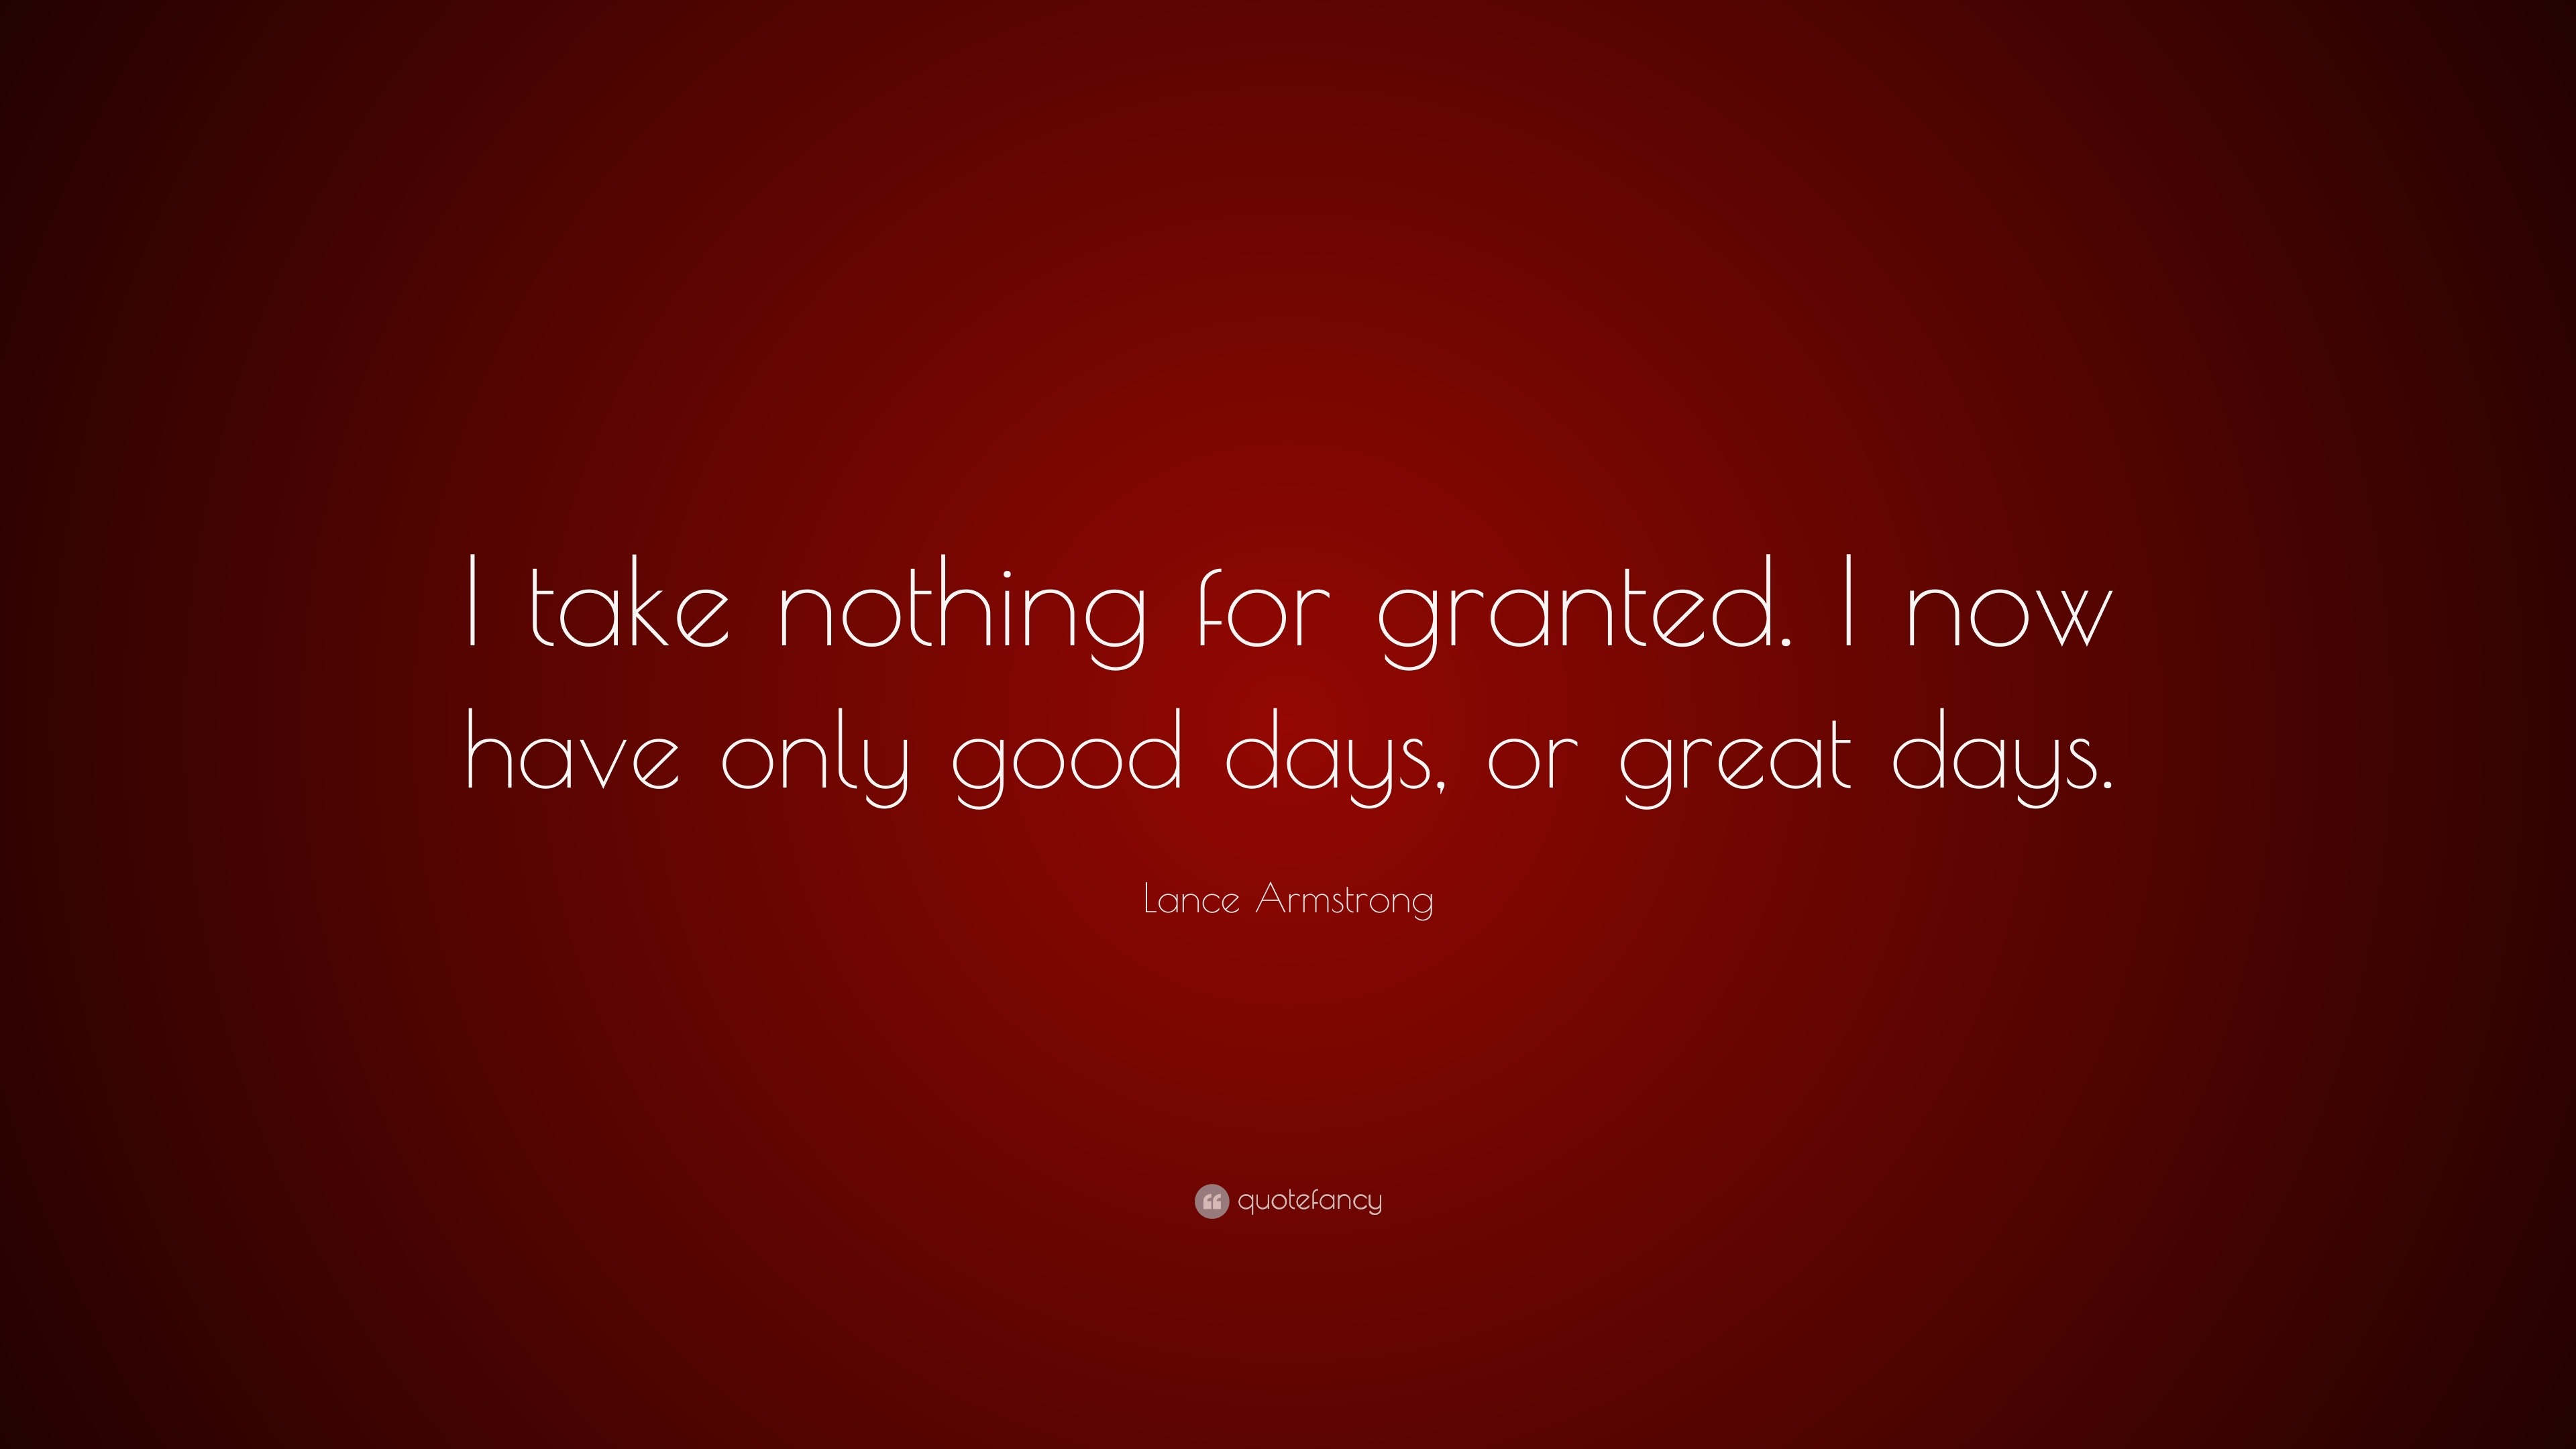 Lance Armstrong Quote I Take Nothing For Granted I Now Have Only Good Days Or Great Days 10 Wallpapers Quotefancy